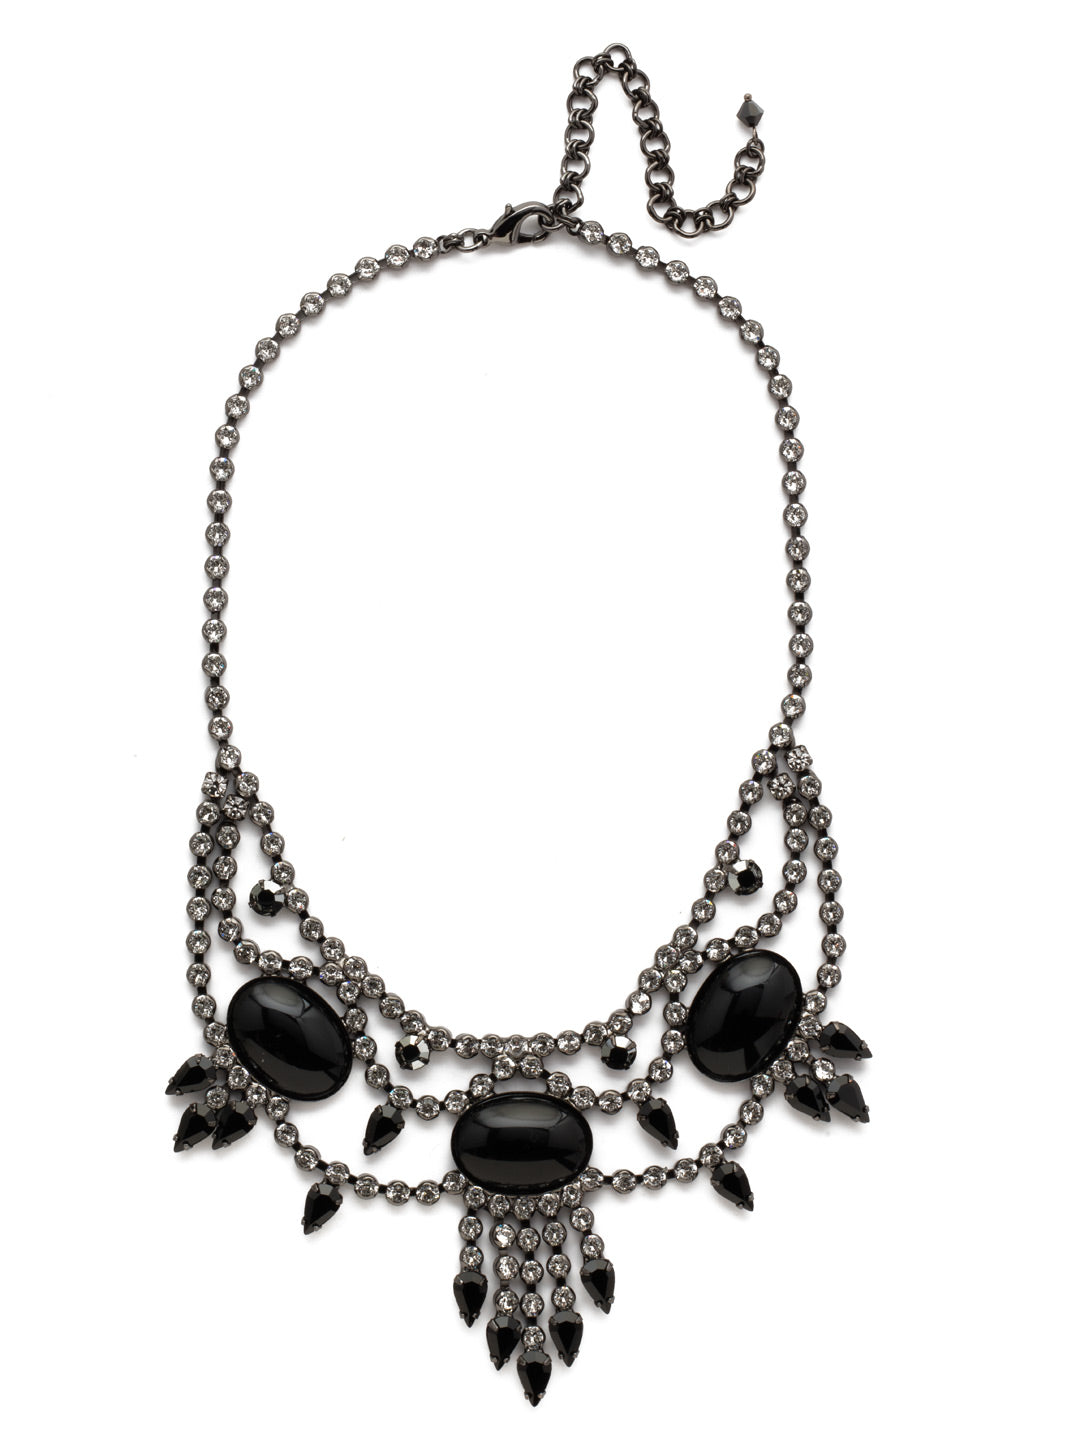 Living on the Fringe Statement Necklace - NCQ19GMMMO